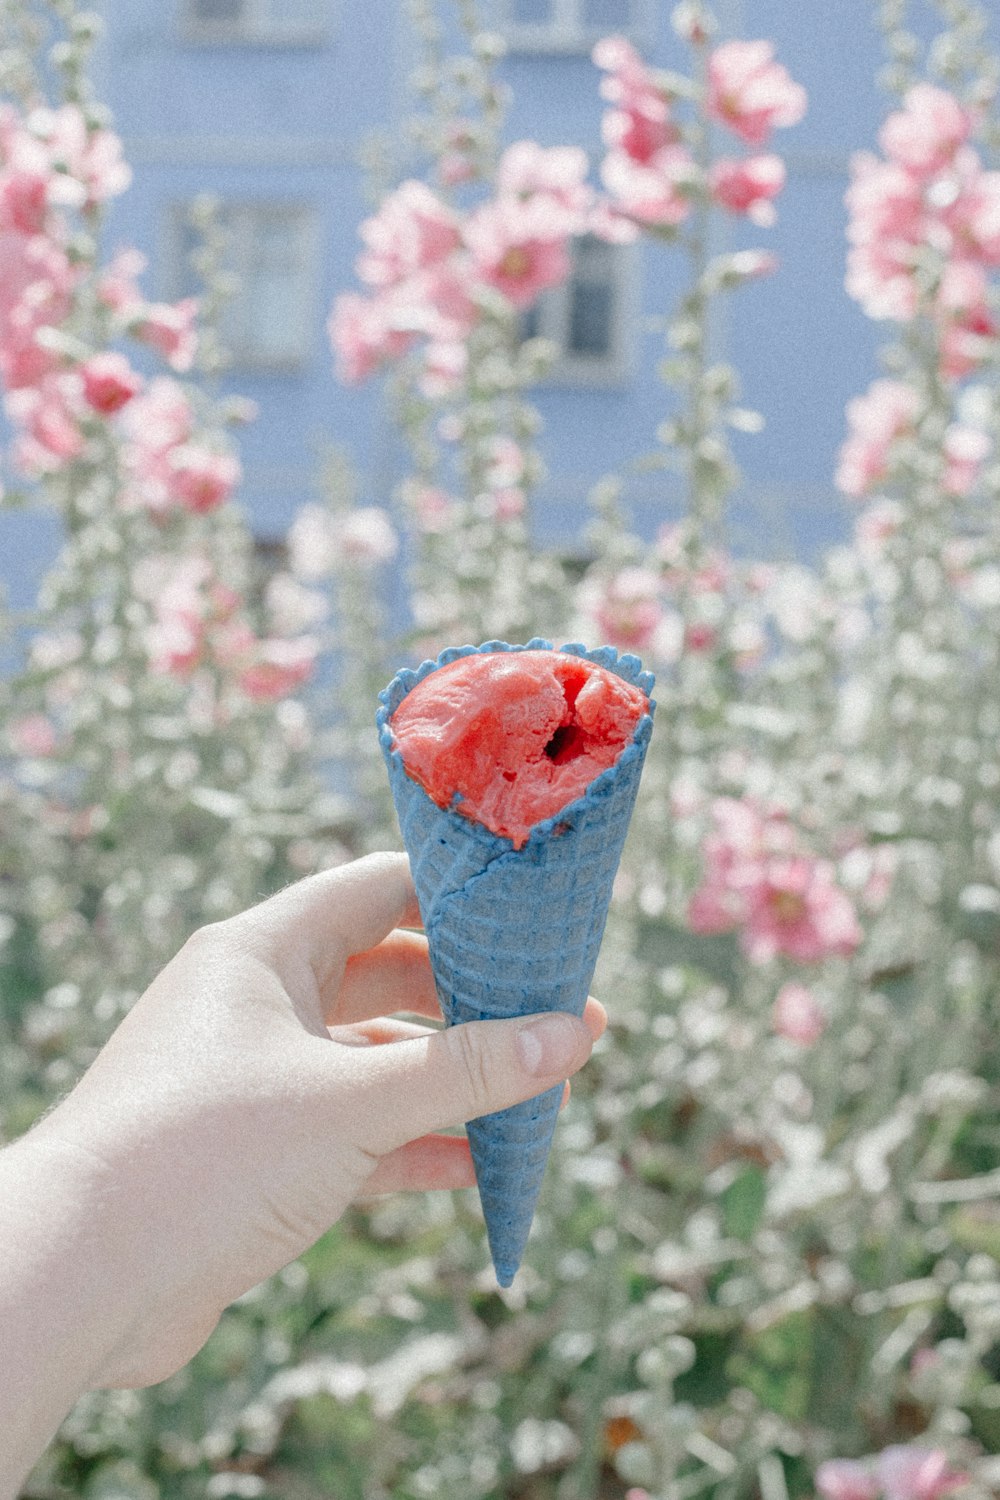 person holding blue and red ice cream